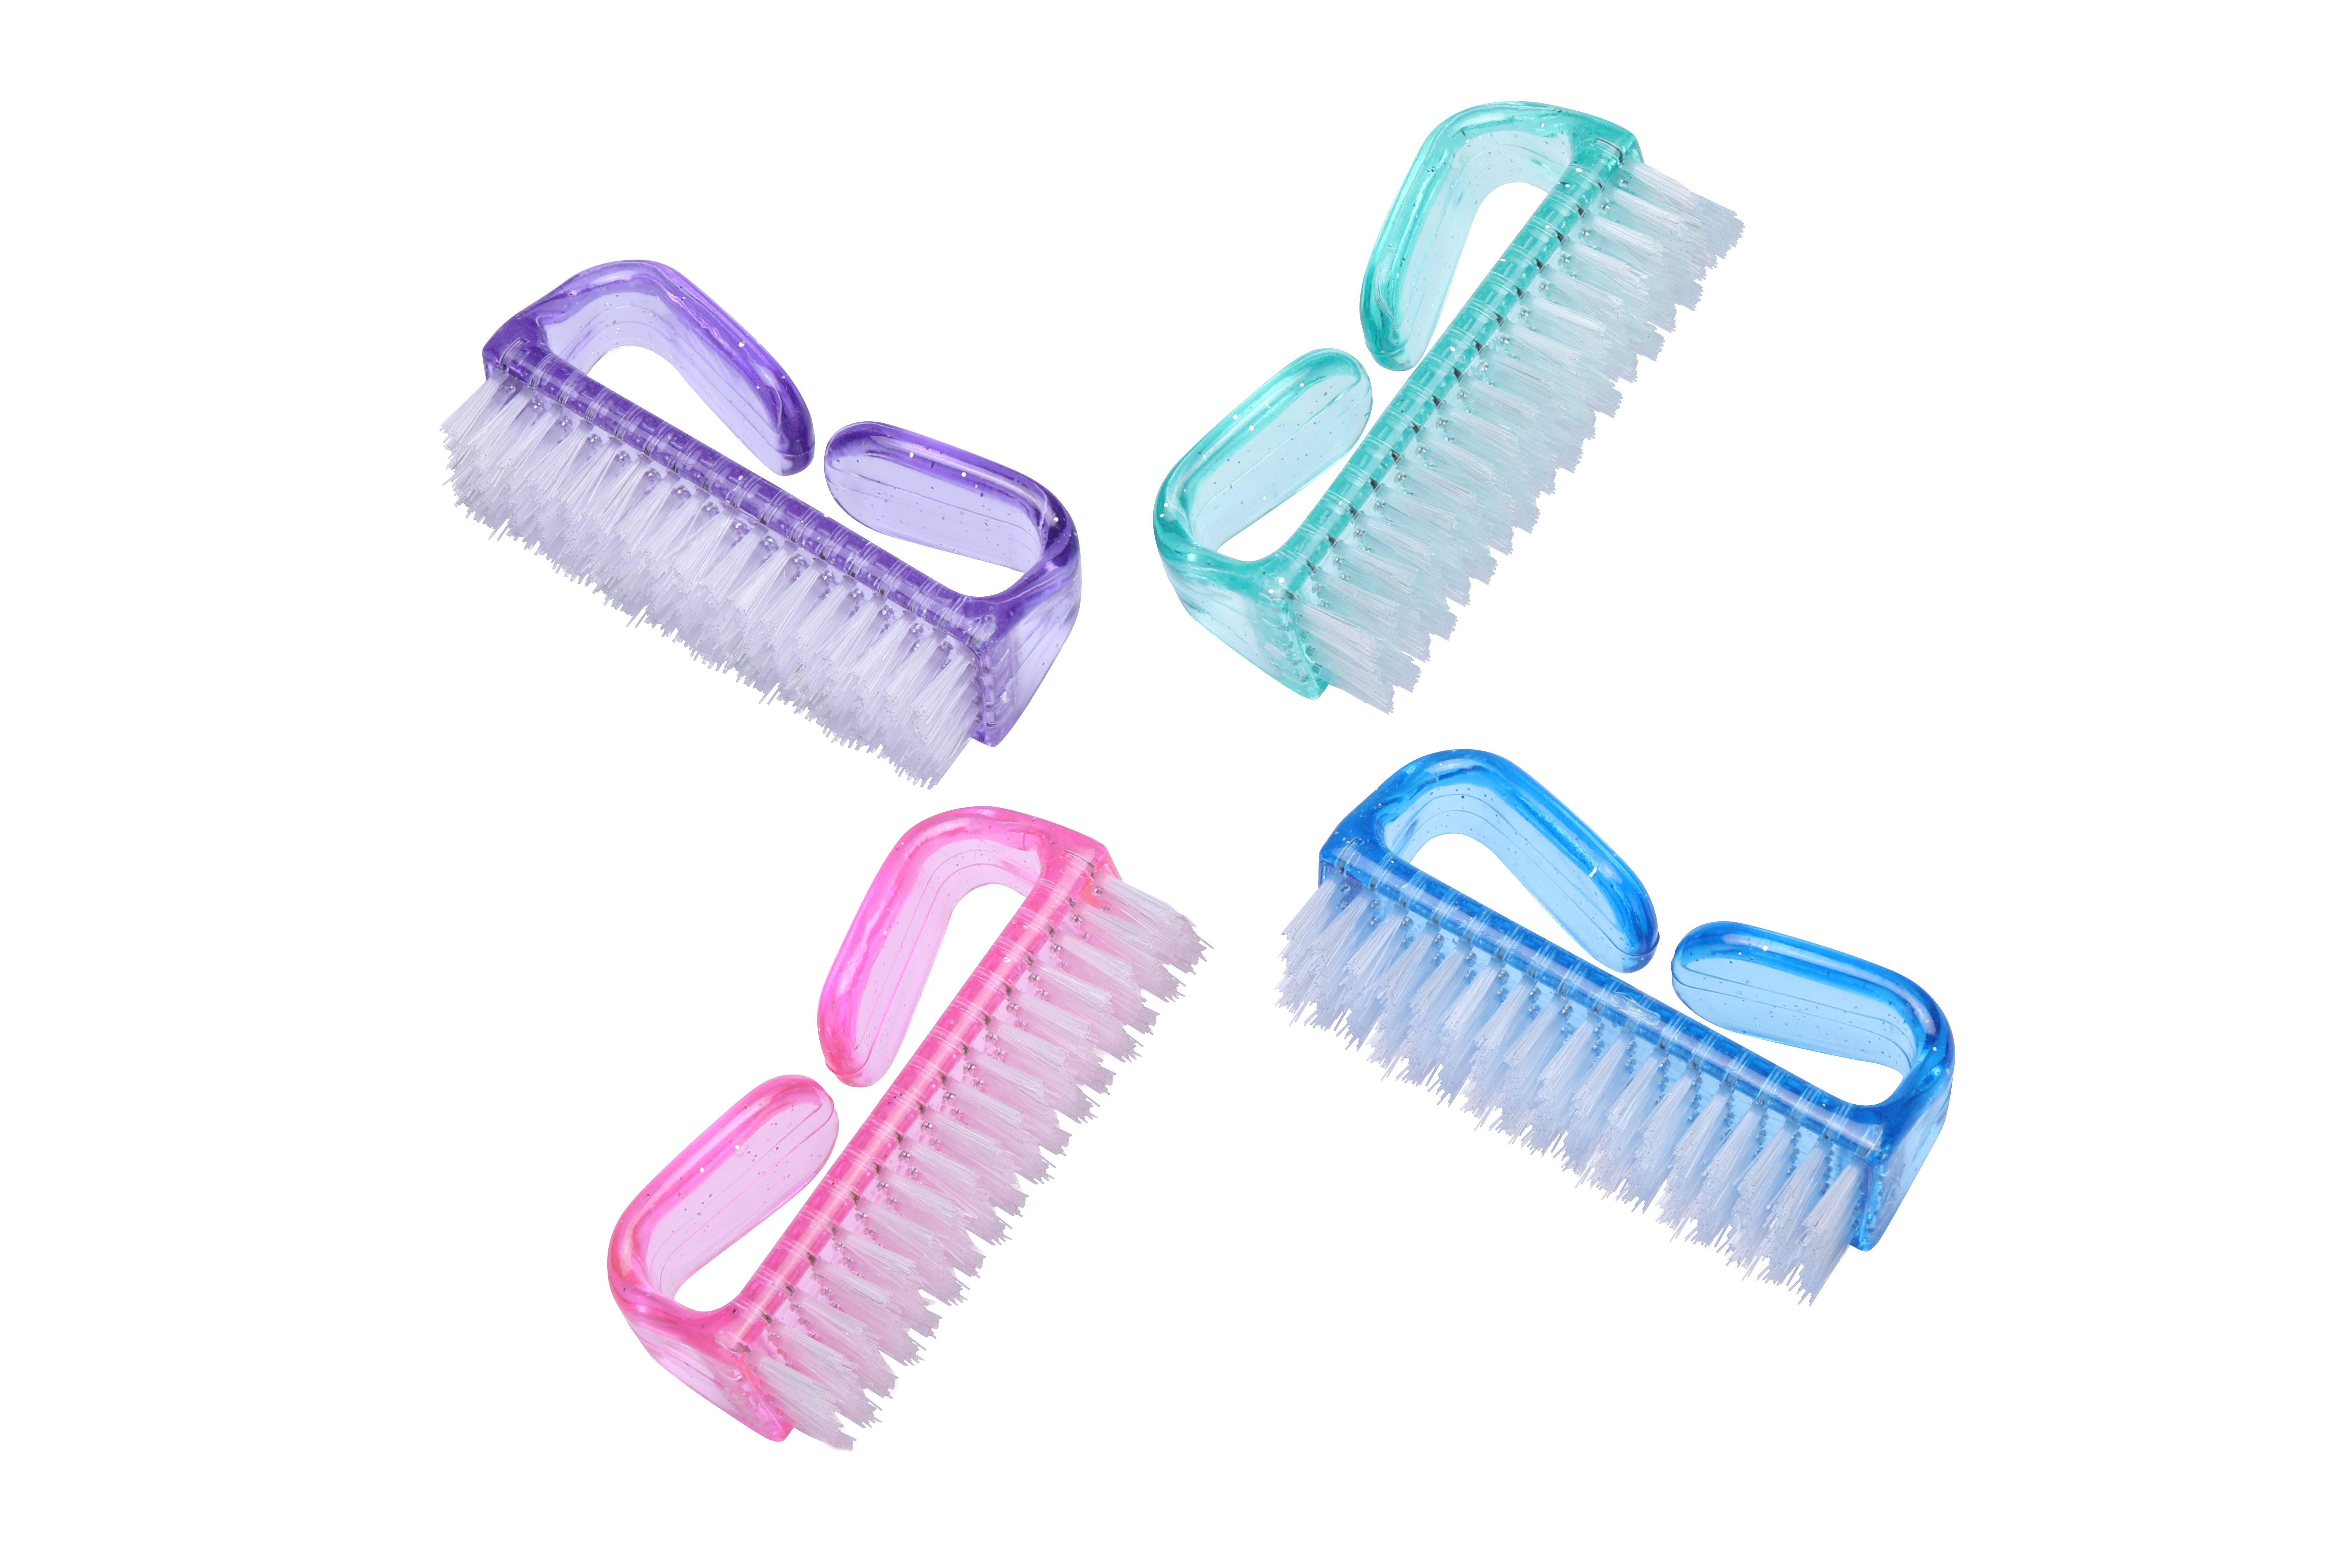 4. Acrylic Nail Brush Cleaner - wide 6